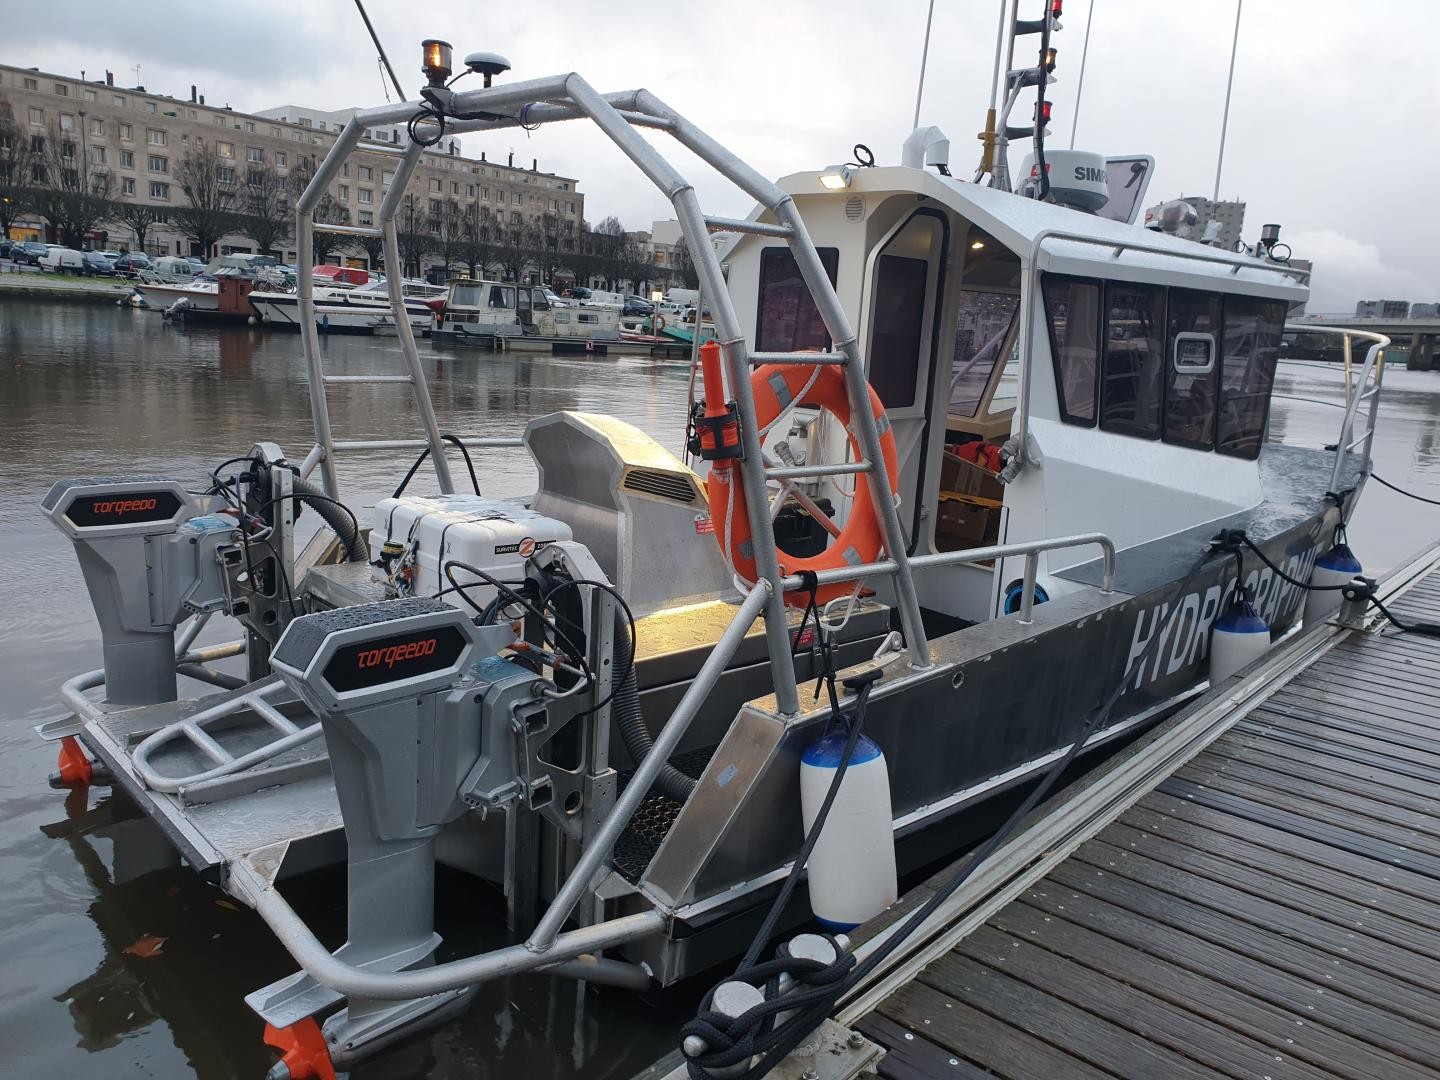 Torqeedo electric propulsion on French hydrographic boat